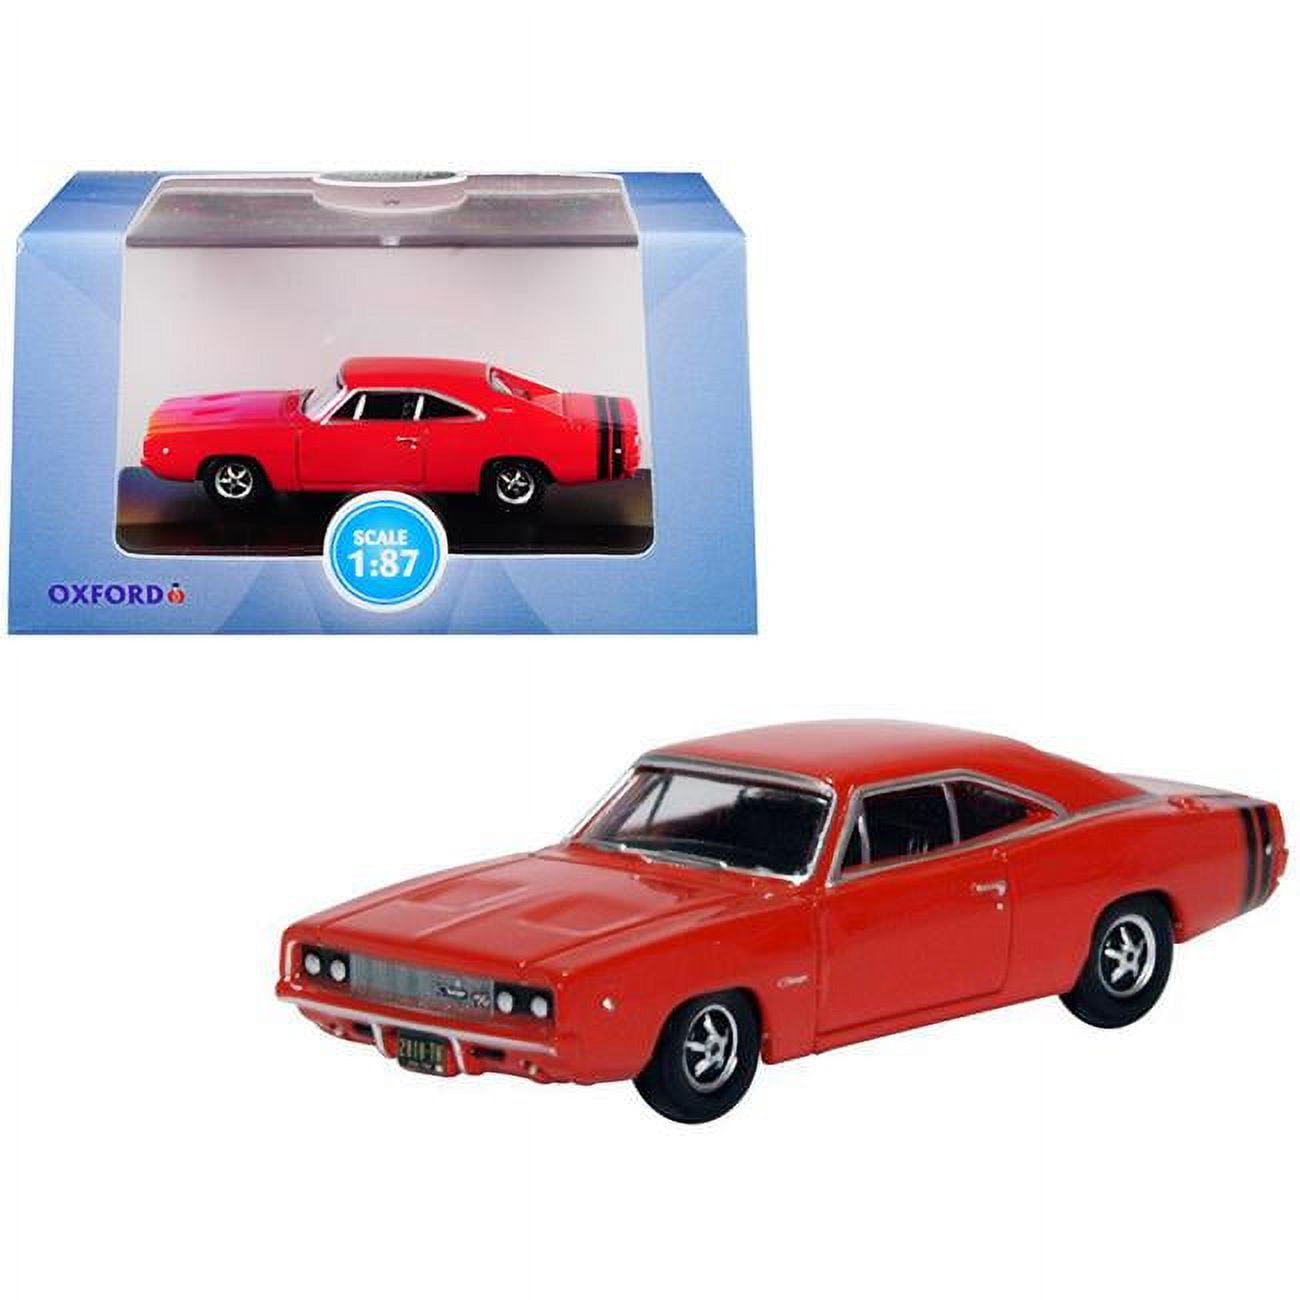 87dc68001 1968 Dodge Charger Stripes 1 By 87 Ho Scale Diecast Model Car, Bright Red & Black